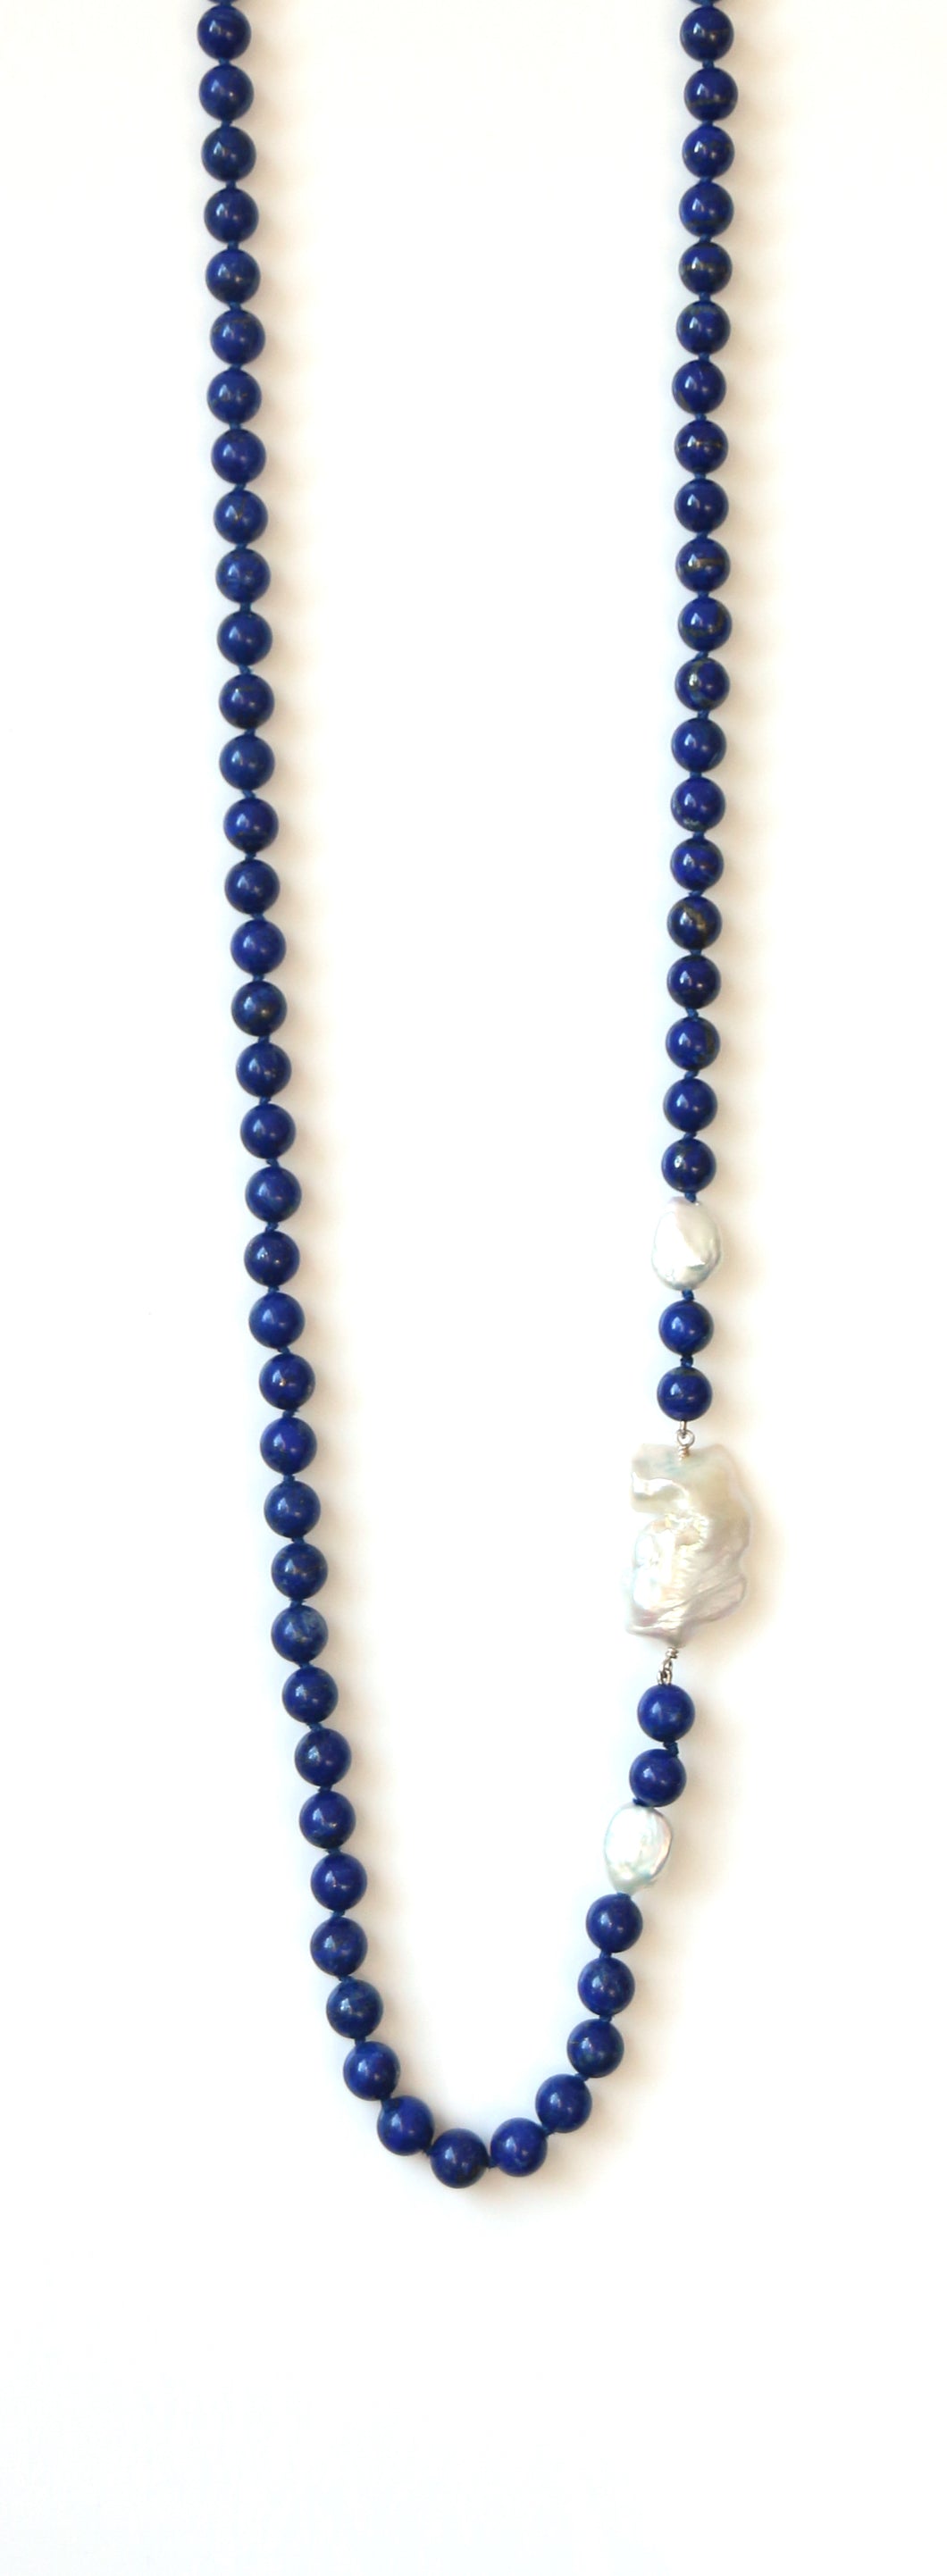 Australian Handmade Blue Necklace with Lapis Lazuli featuring Baroque Pearl Sidepieces